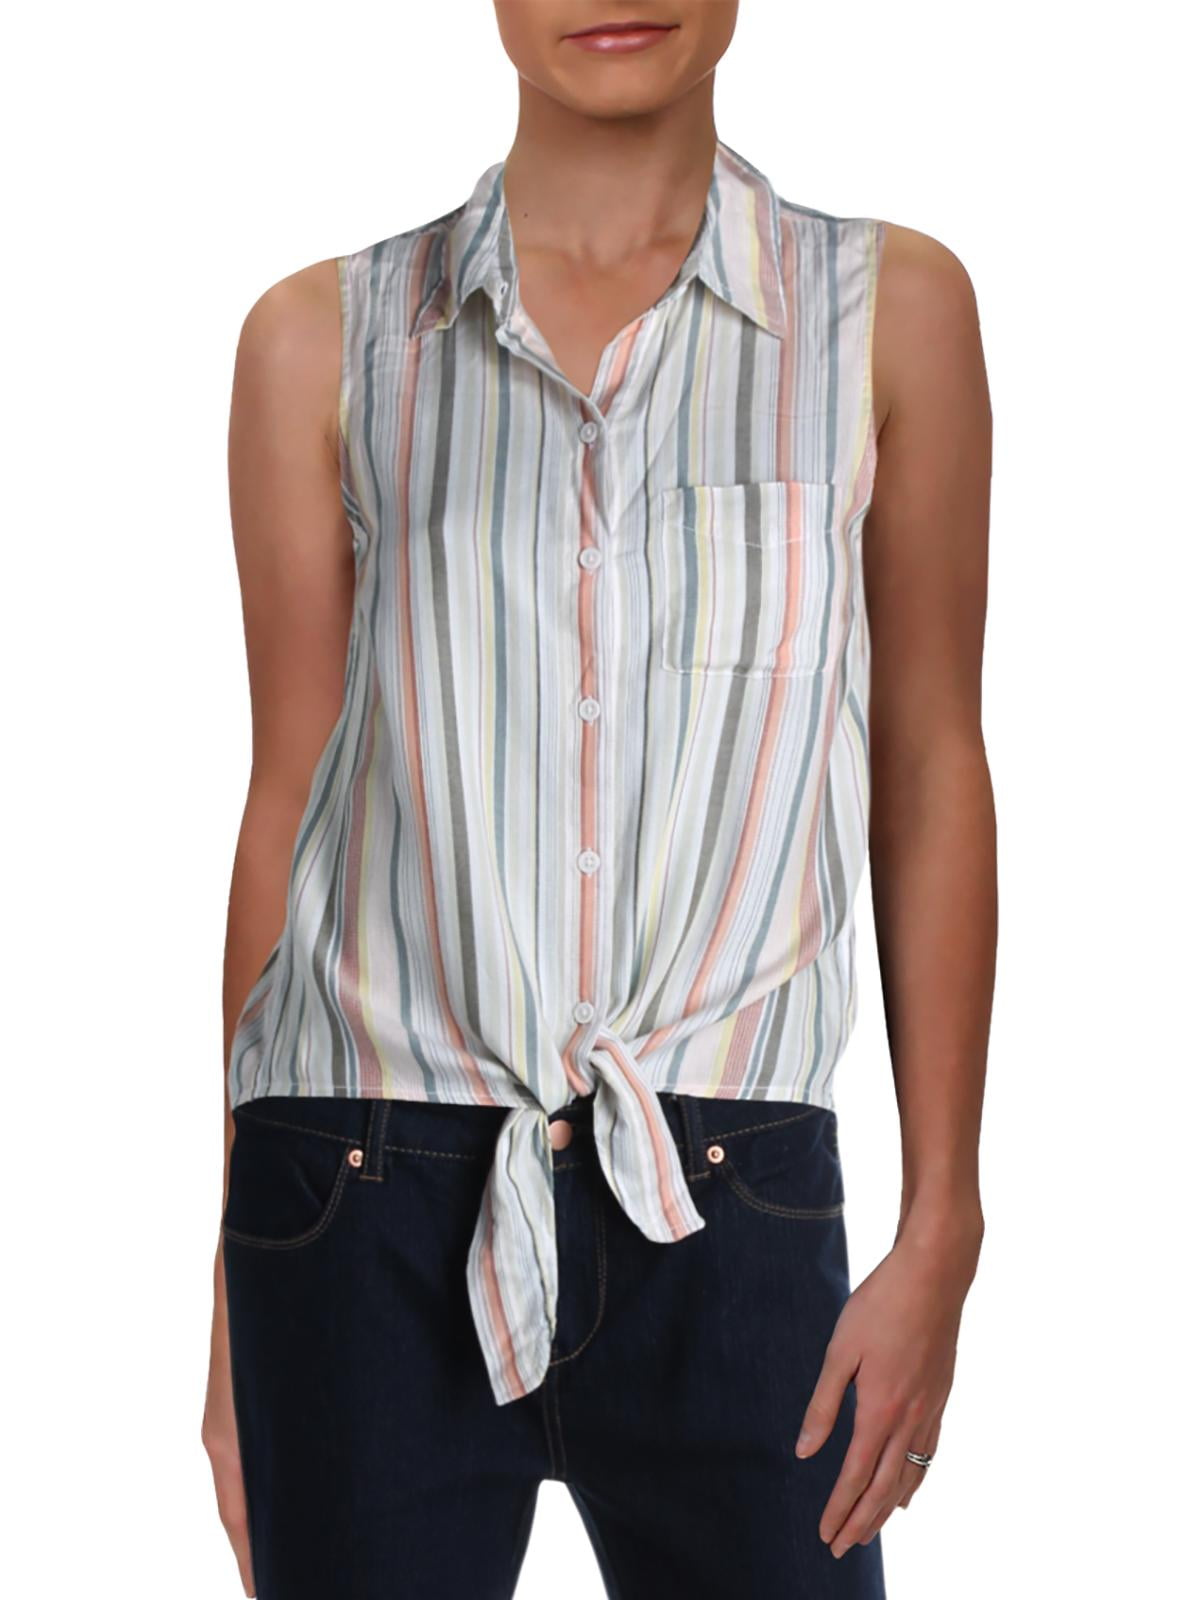 beachlunchlounge - Beach Lunch Lounge Womens Striped Collared Button